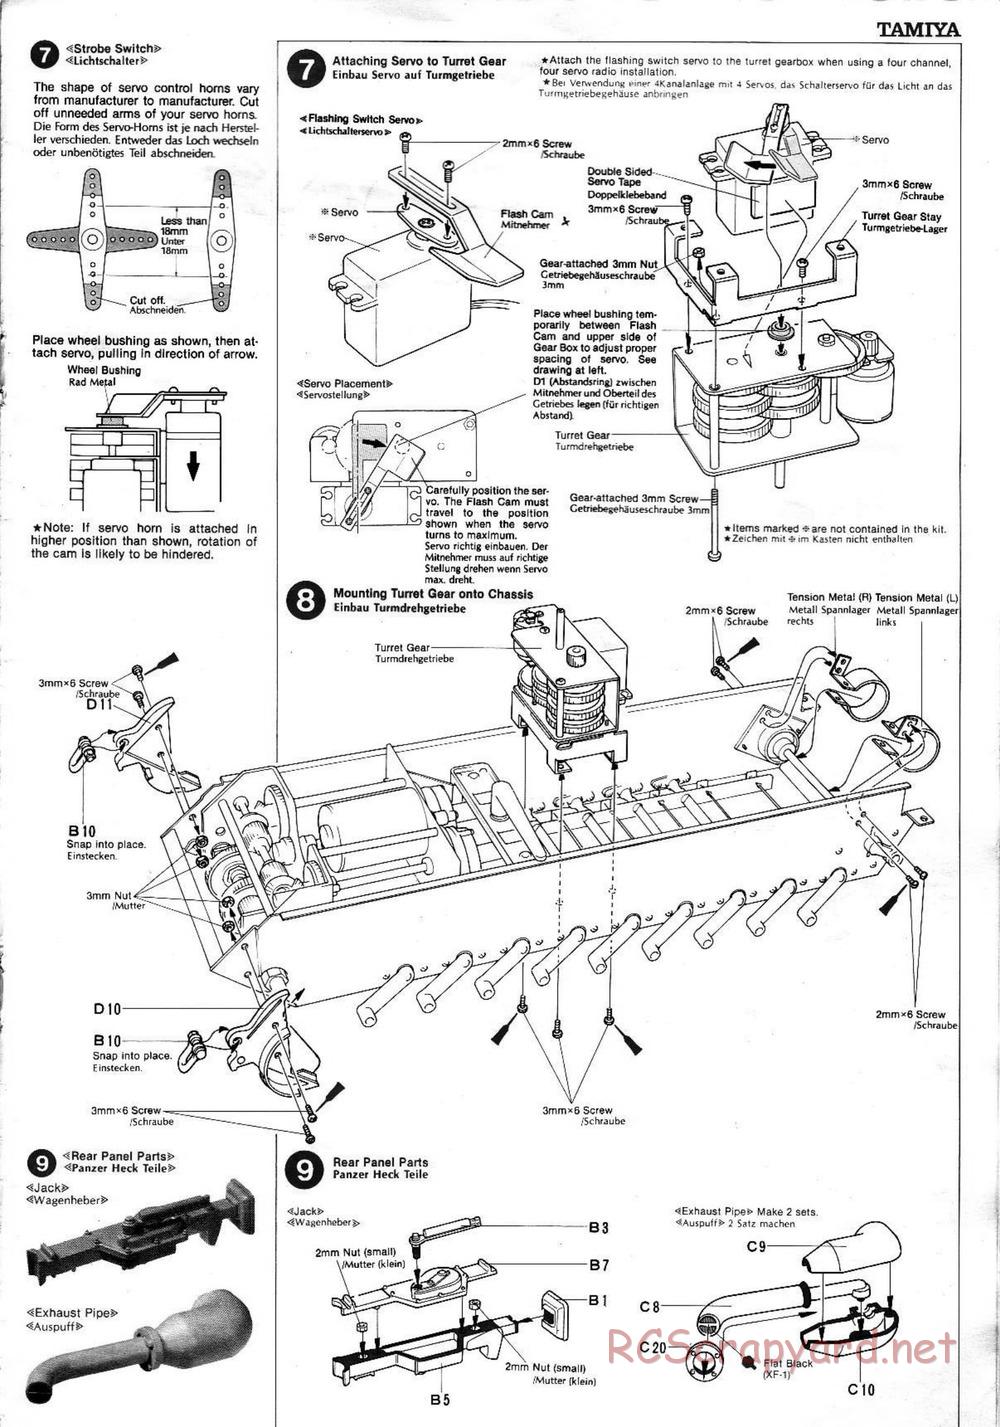 Tamiya - King Tiger (Production Turret) - 1/16 Scale Chassis - Manual - Page 5